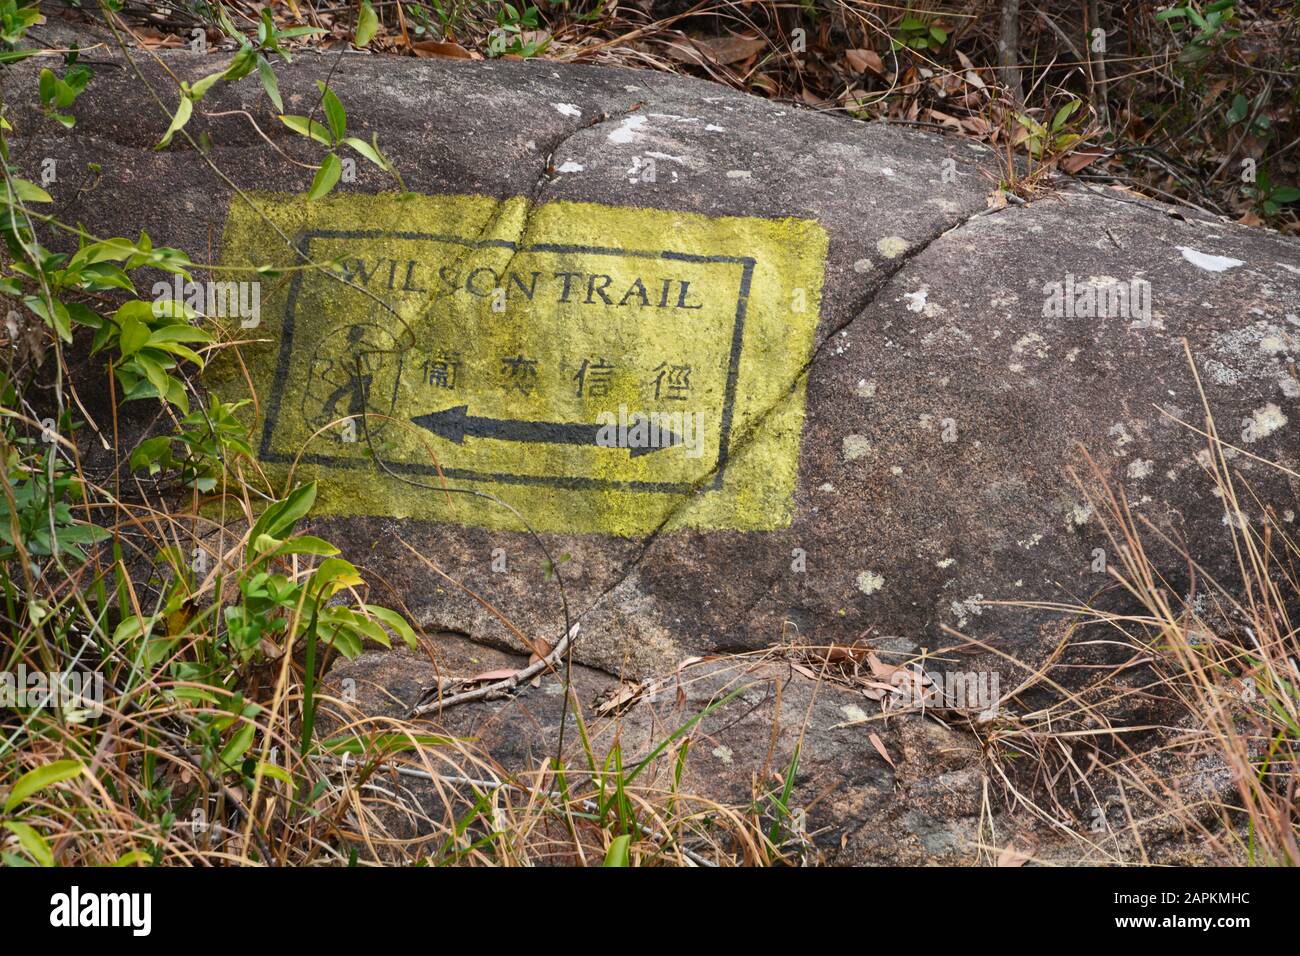 A sign painted on a bolder for Wilson Trail in the hills above Hong Kong. Stock Photo